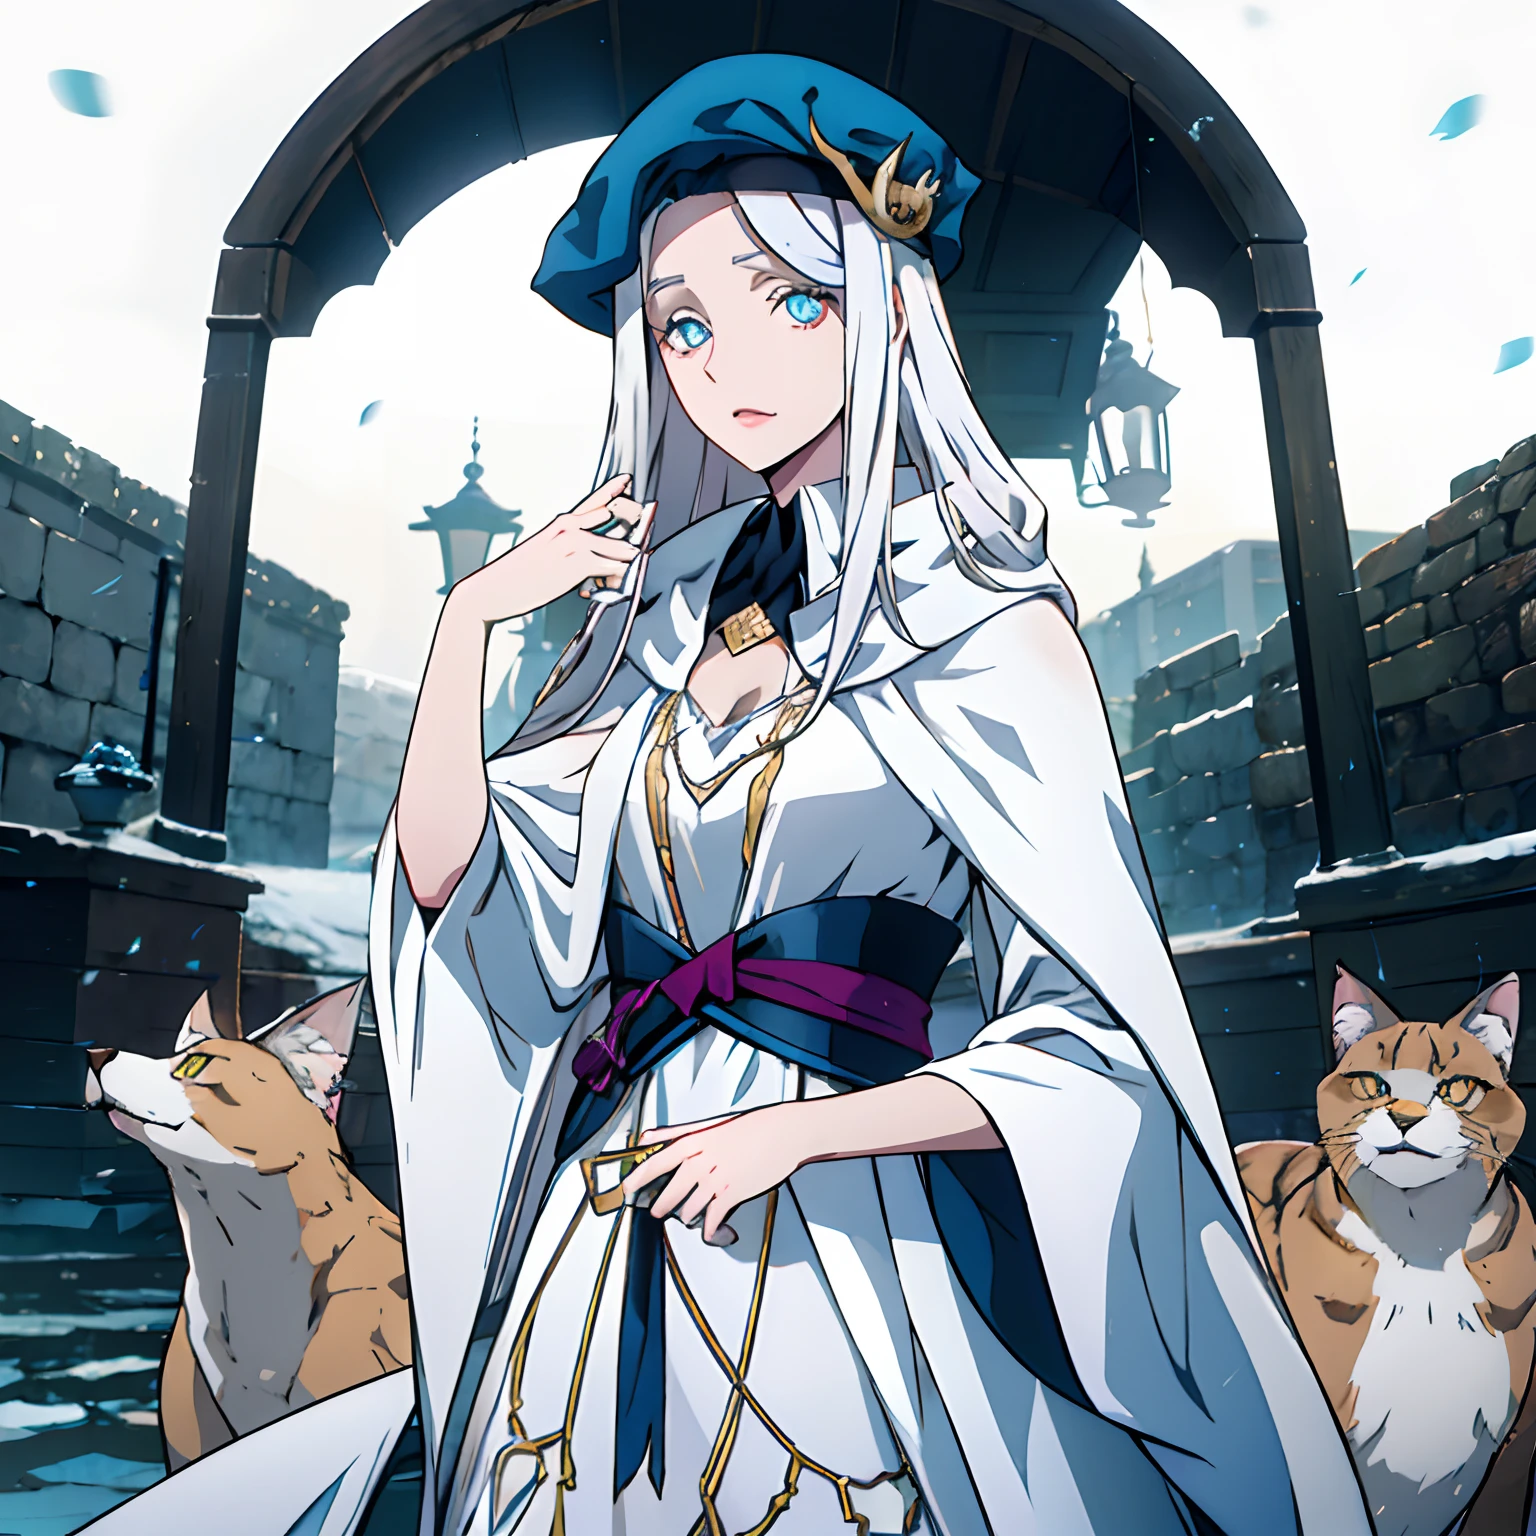 White haired girl, white cat ears, Wearing a white witch's hat, blue colored eyes